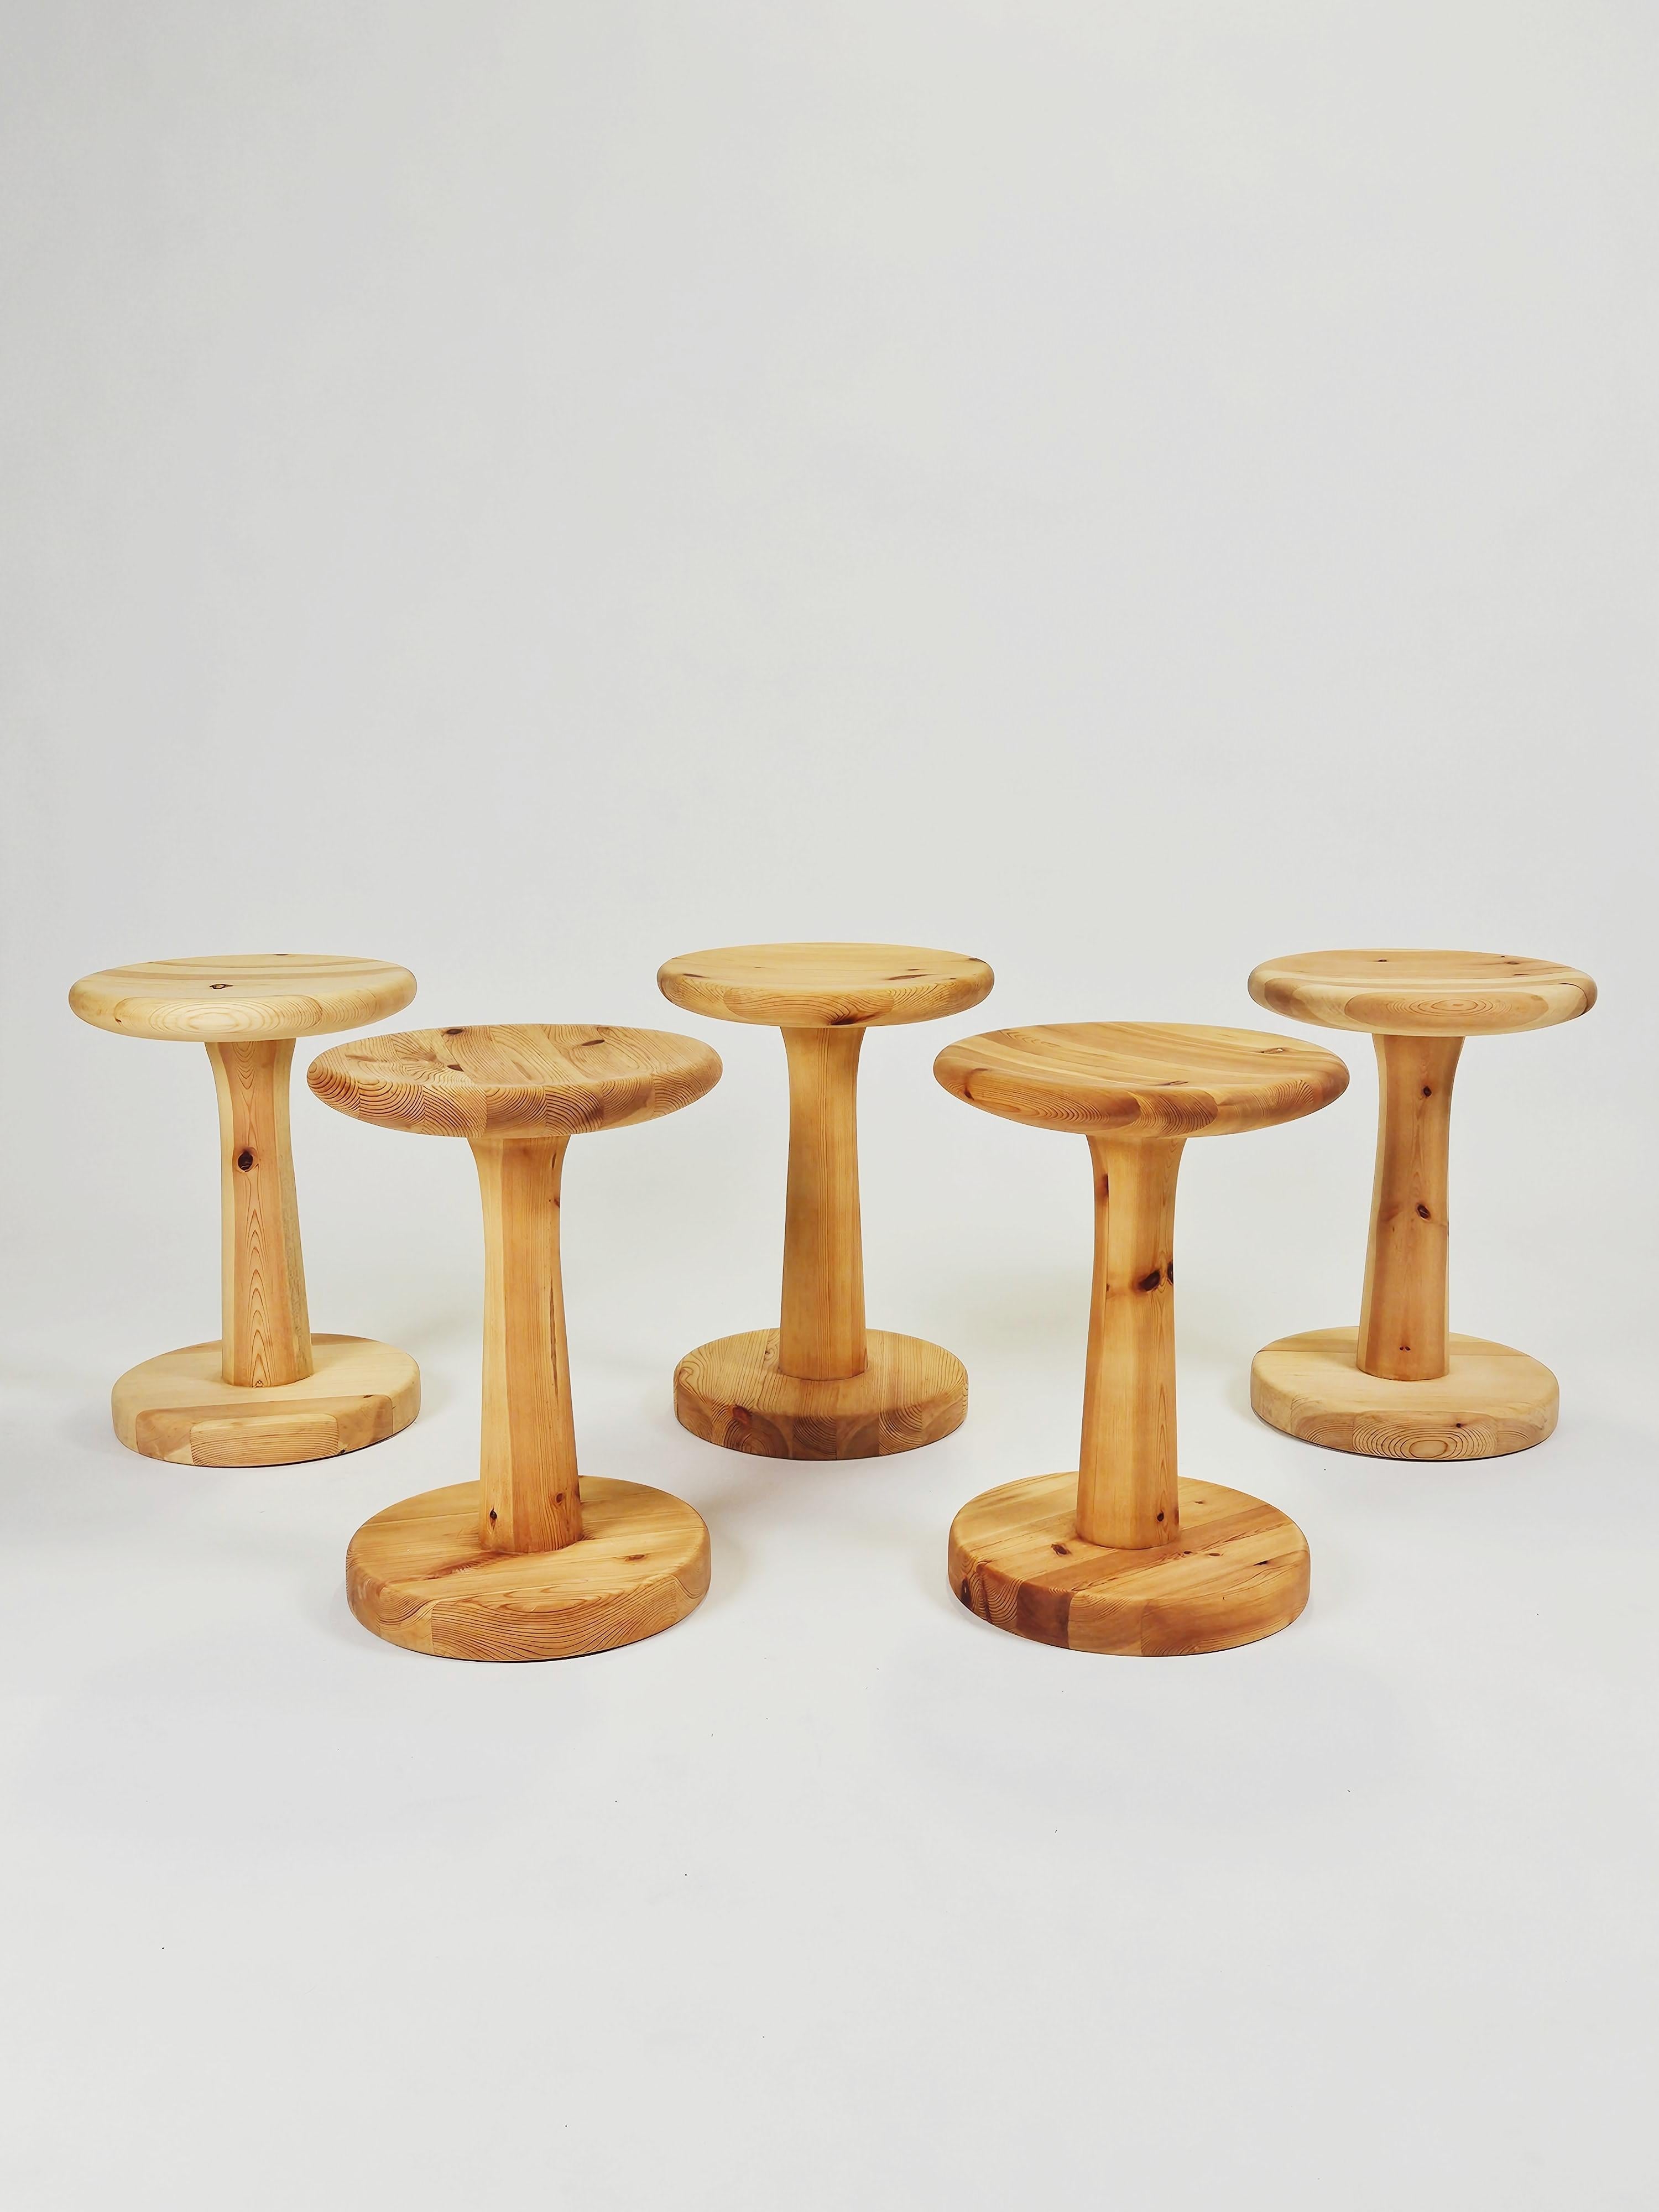 Set of foce pine stools designed by Rainer Daumiller and produced by Hirtshals Savvaerk during the 1970s.

Sculptural design in solid pine. 